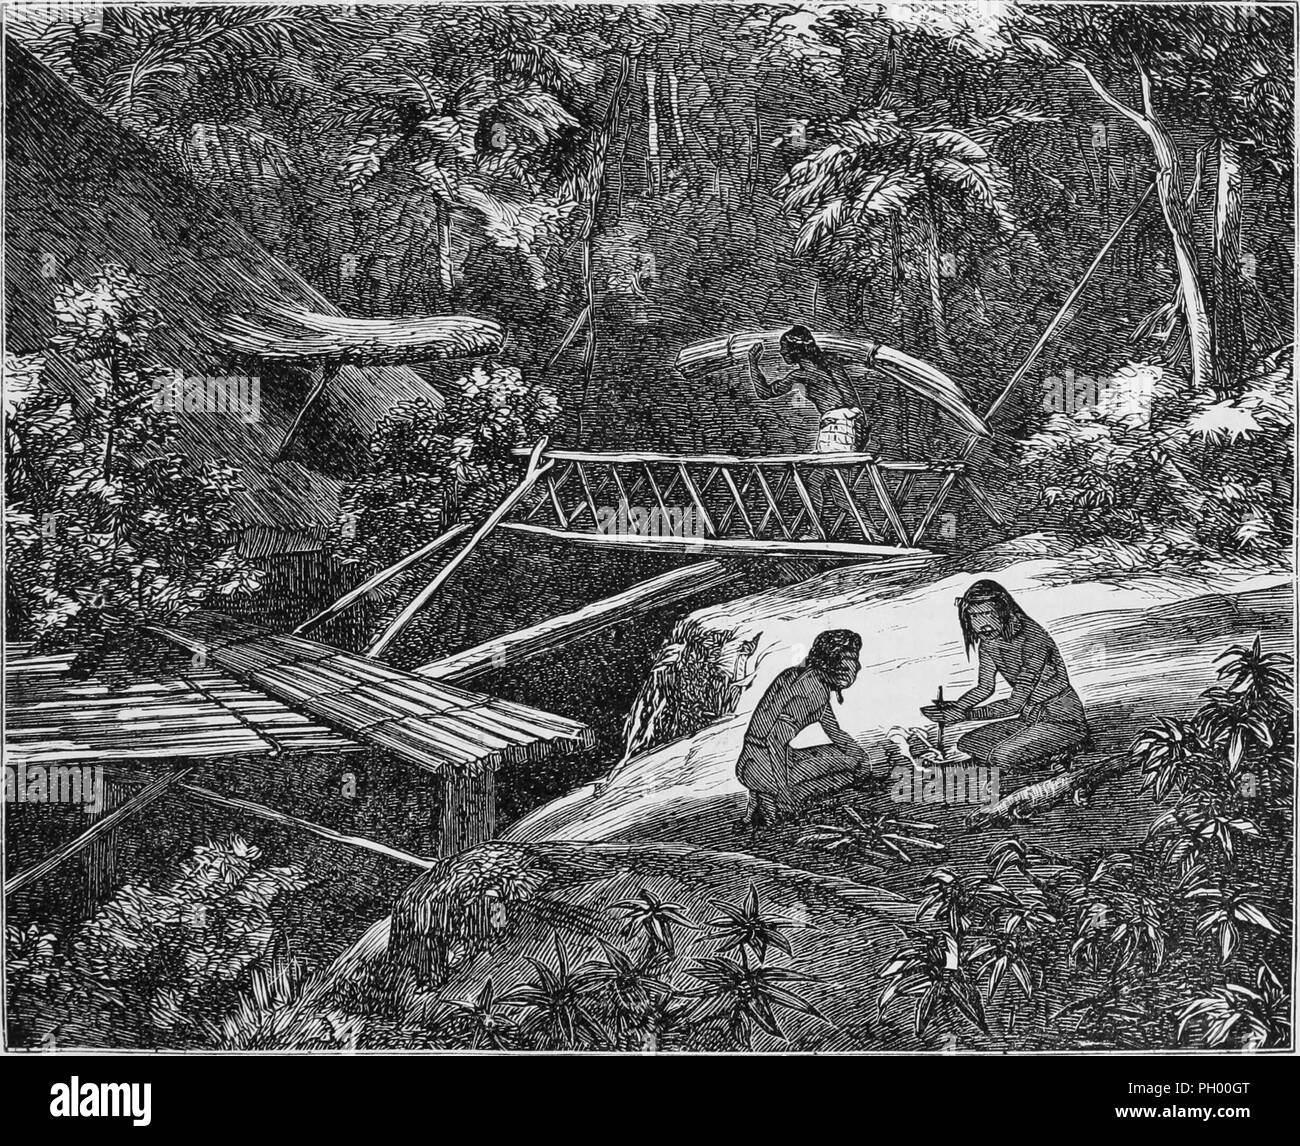 Black and white vintage print, depicting a Dayak longhouse being built, with a Dayak man carrying thatching over a bridge to the roof in the background, a long external platform at left, and two Dayak men sitting cross-legged in the foreground, one rubbing a stick on flat piece of wood to make a fire, located in Borneo, published in John George Wood's volume 'The uncivilized races of men in all countries of the world, being a comprehensive account of their manners and customs, and of their physical, social, mental, moral and religious characteristics', 1877. Courtesy Internet Archive. () Stock Photo